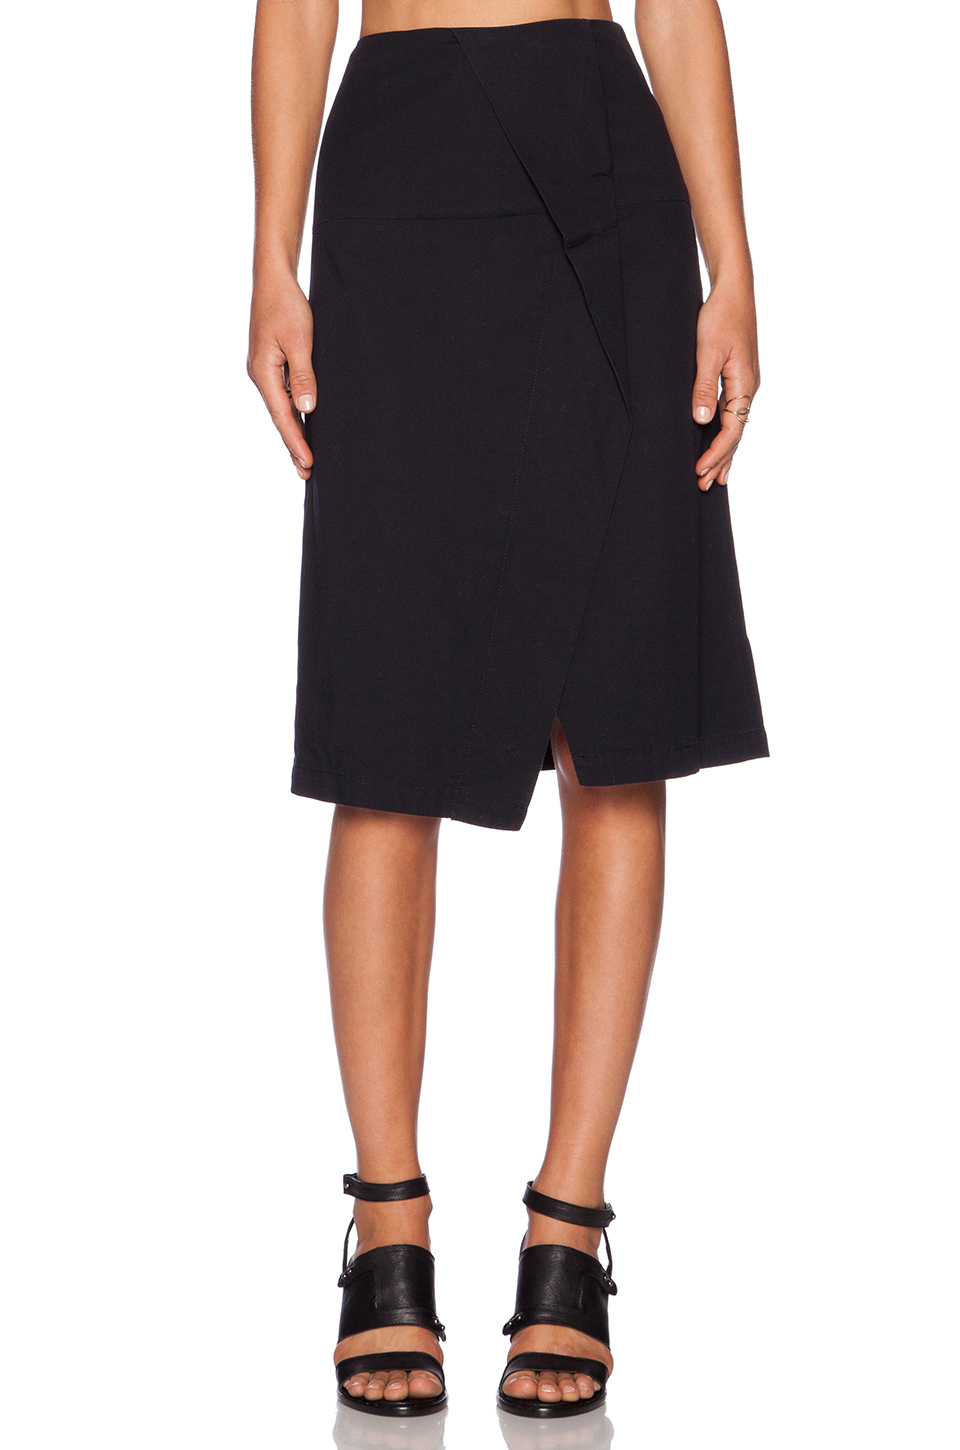 Lyst - Marc by marc jacobs Summer Cotton Skirt in Black